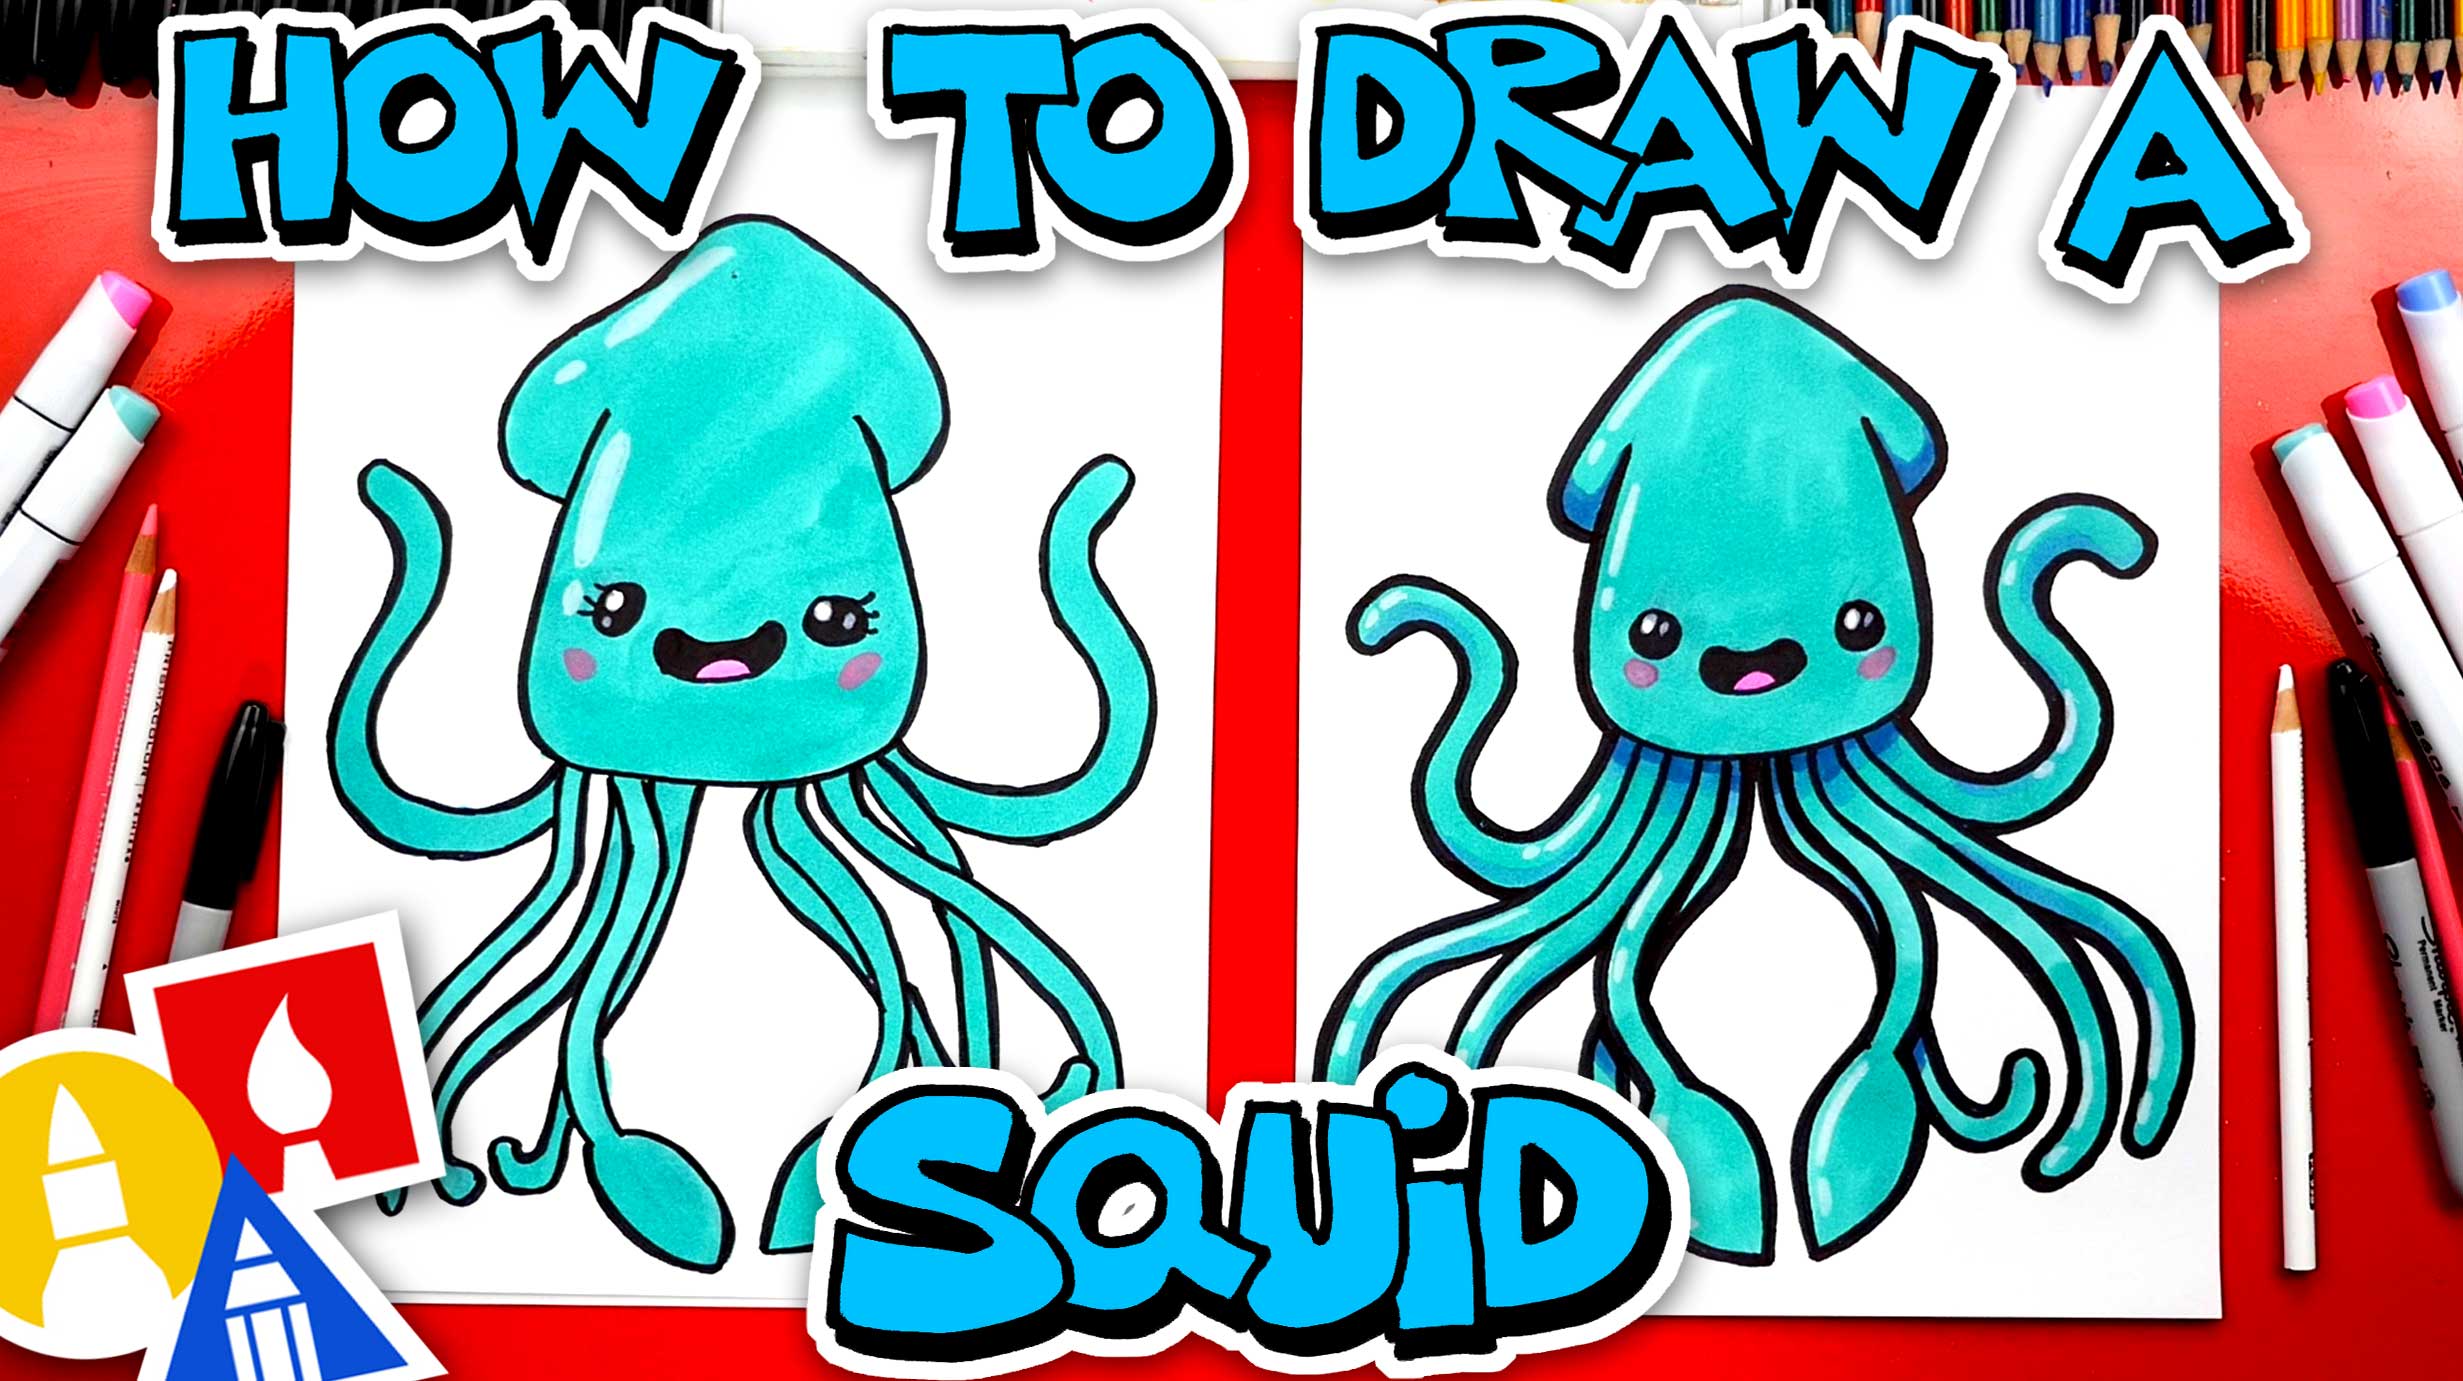 How To Draw A Squid thumbnail